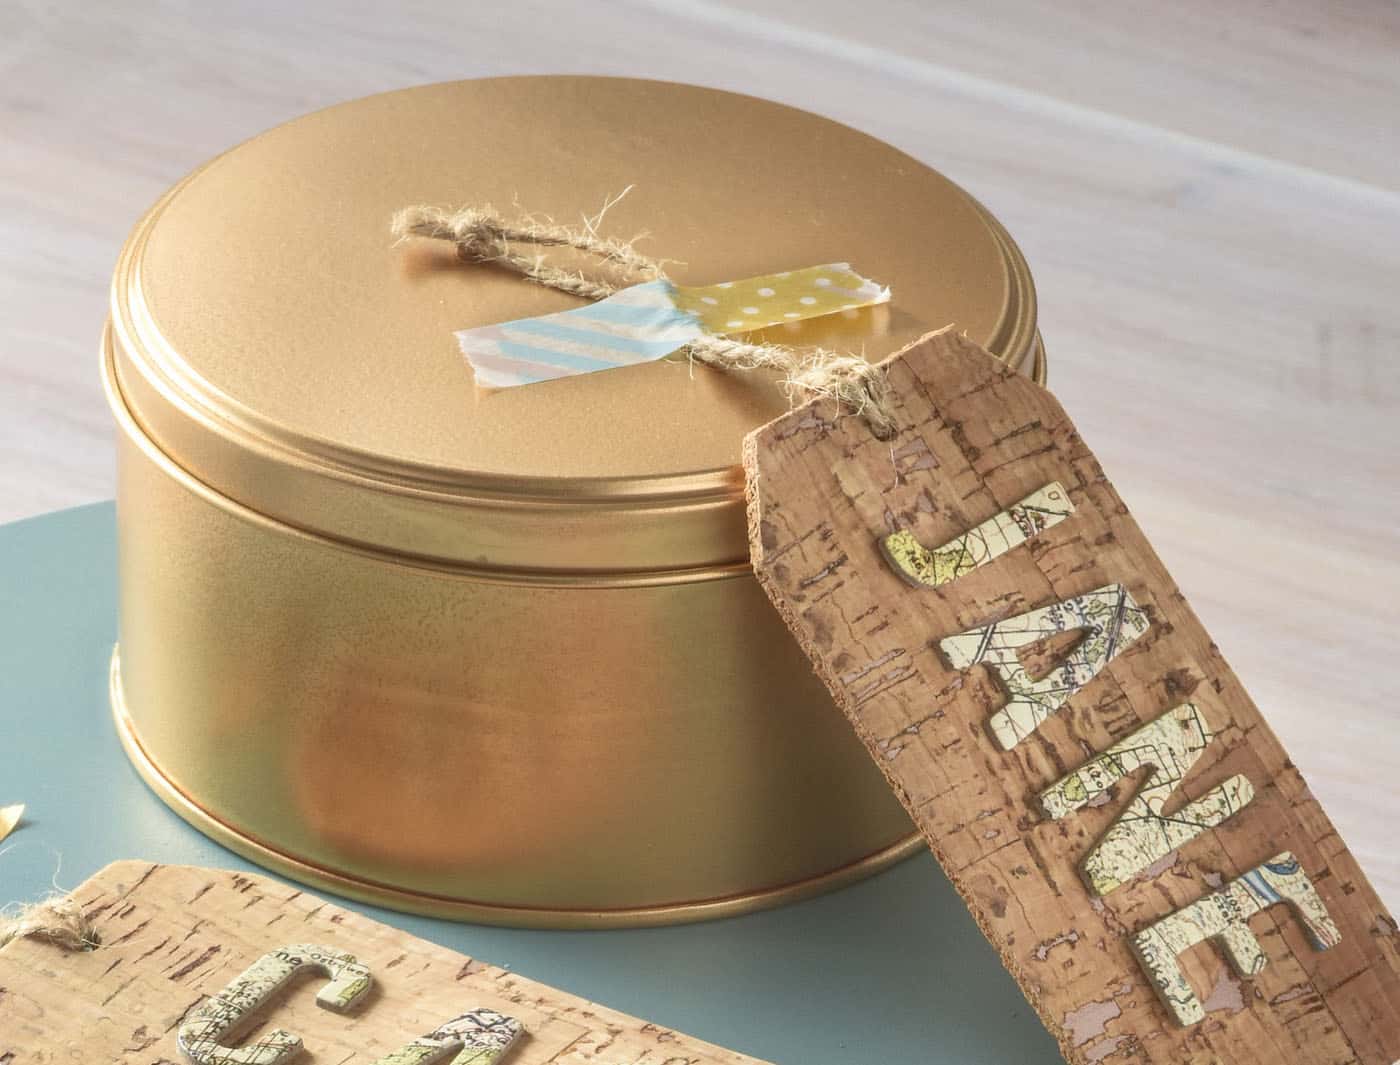 Gold spray painted cookie tin with a cork tag that says "Jane"